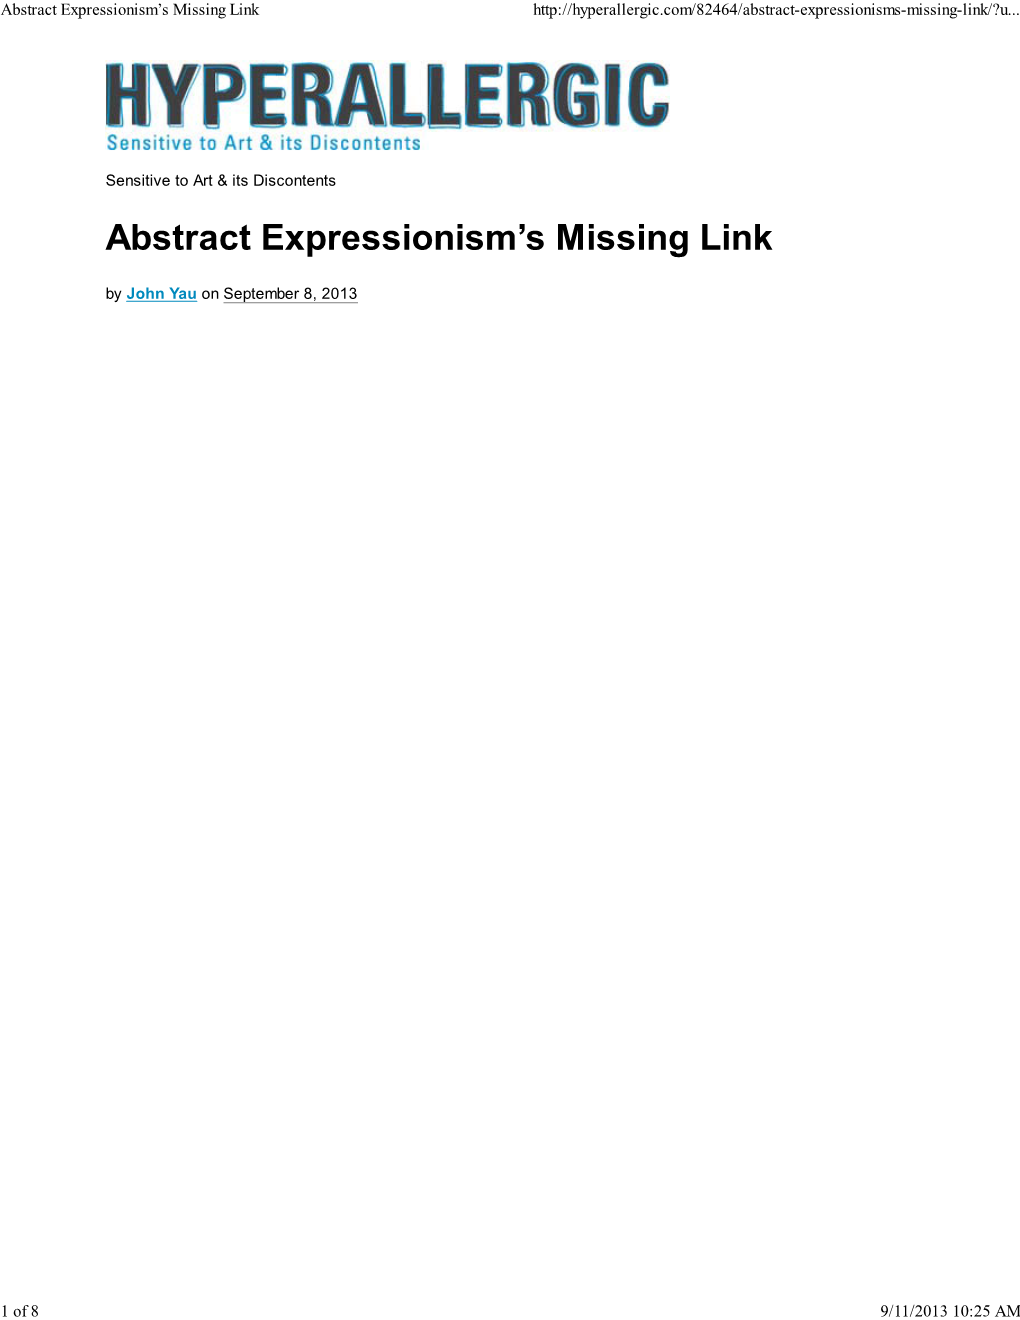 Abstract Expressionism's Missing Link